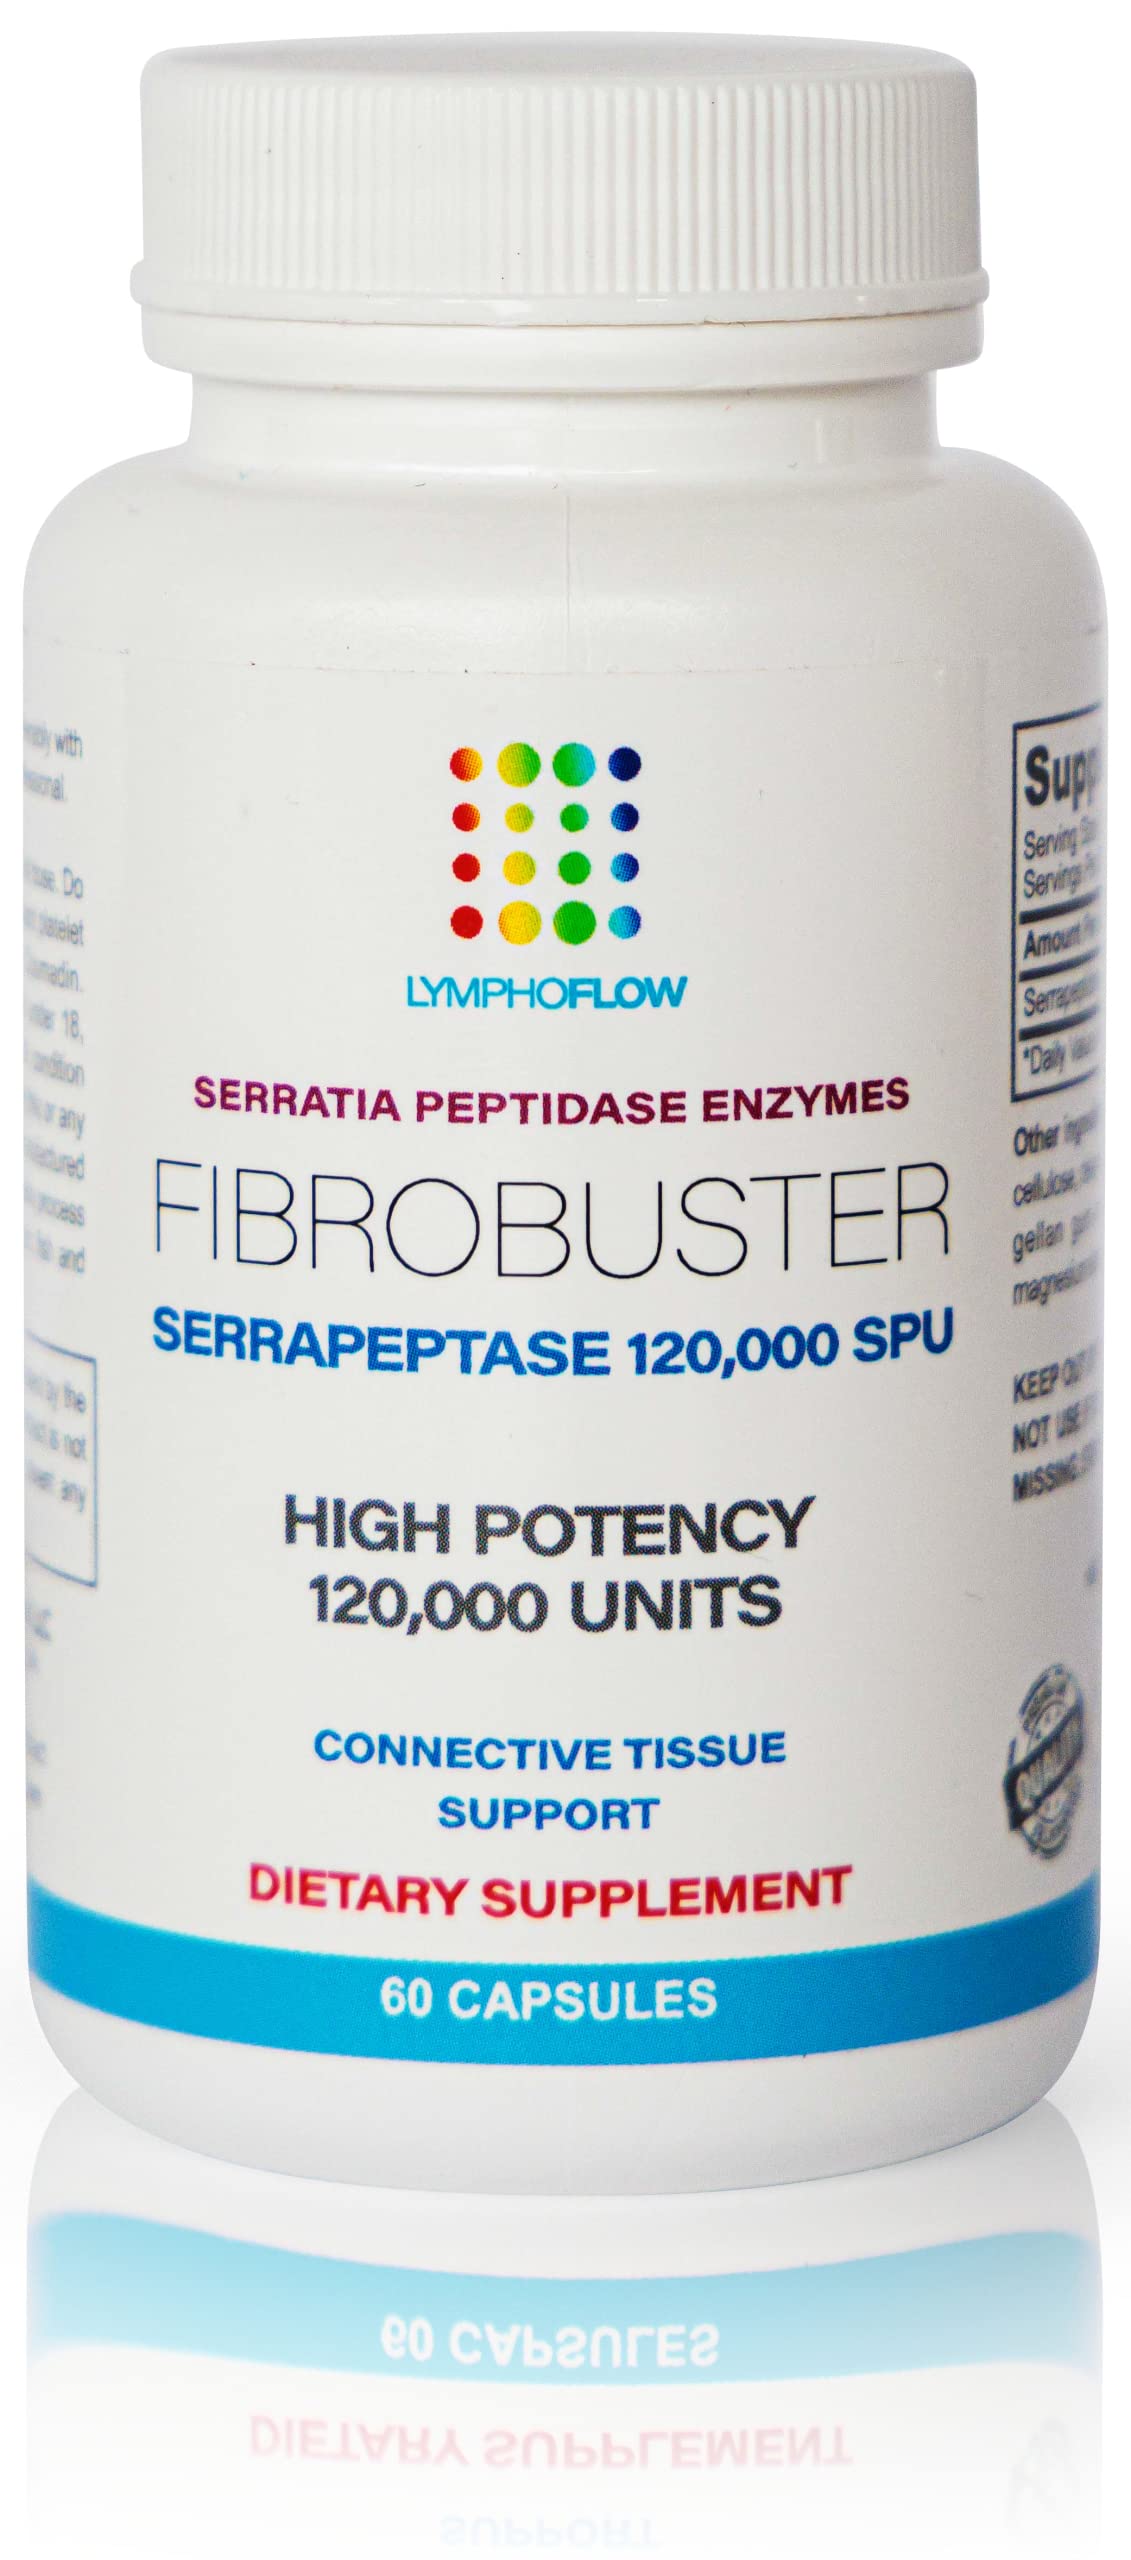 Bruizex FibroBuster: Serrapeptase Proteolytic Enzymes 120,000 SPU, Fibrosis Treatment, Scar & Keloid Removal Supplement for Post Surgery Recovery, Immune Support Supplement, 60 Capsules